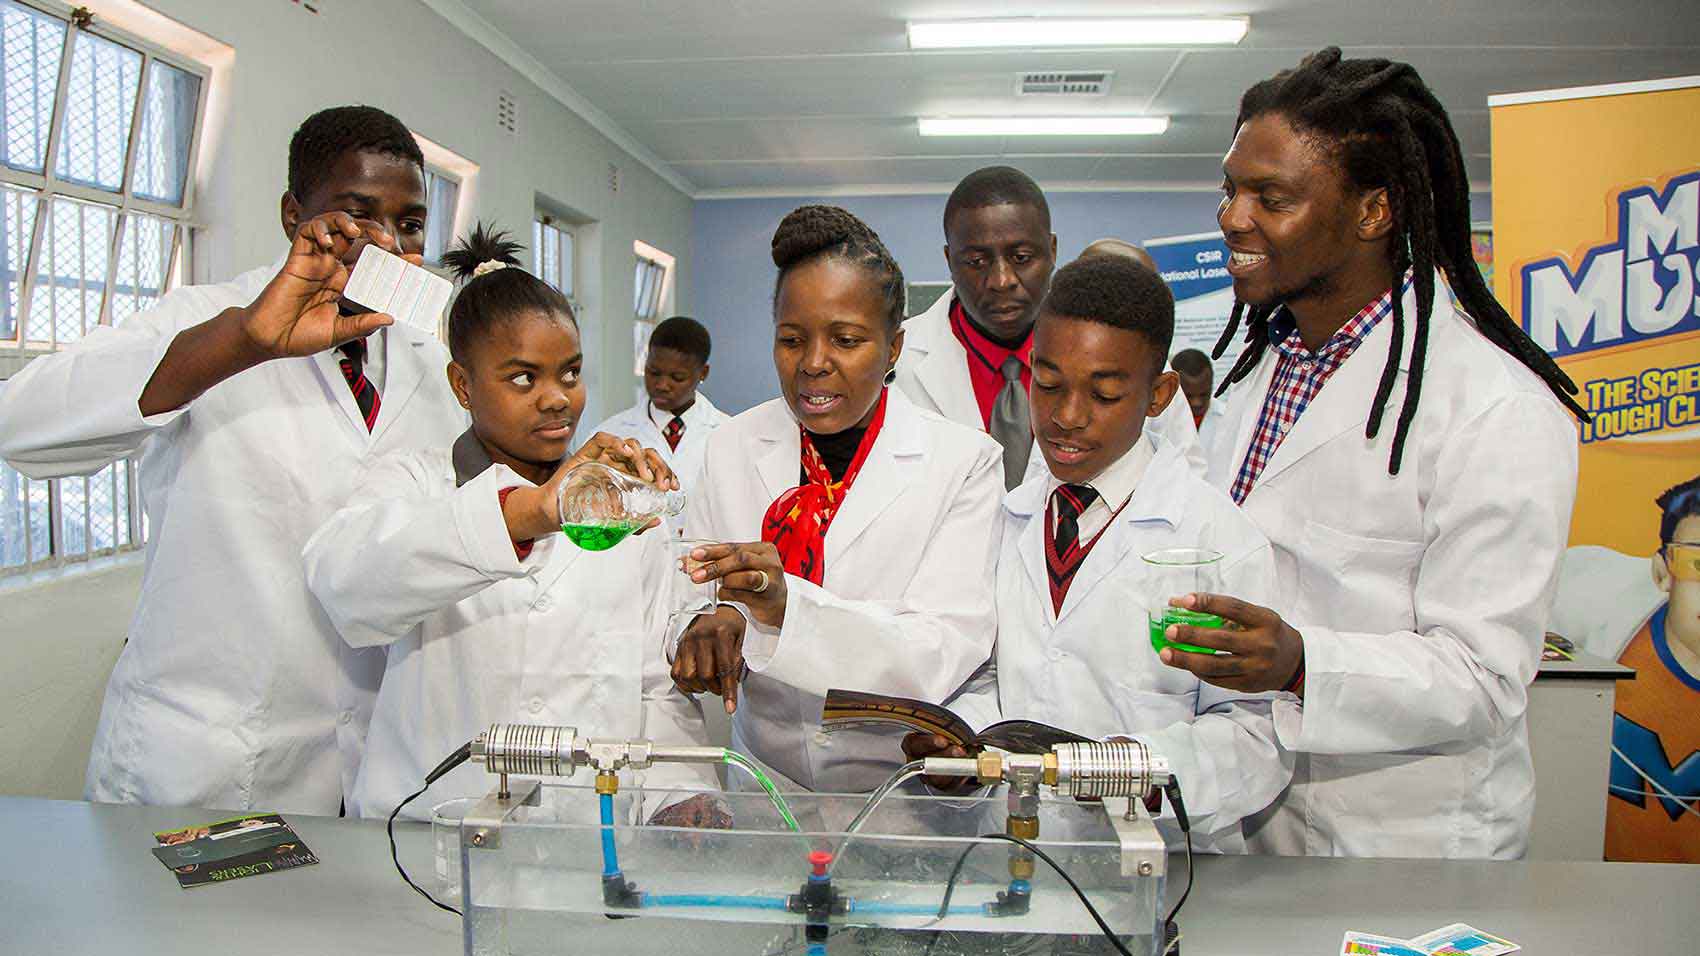 SC Johnson’s corporate philanthropy program provides science lab and equipment for students.